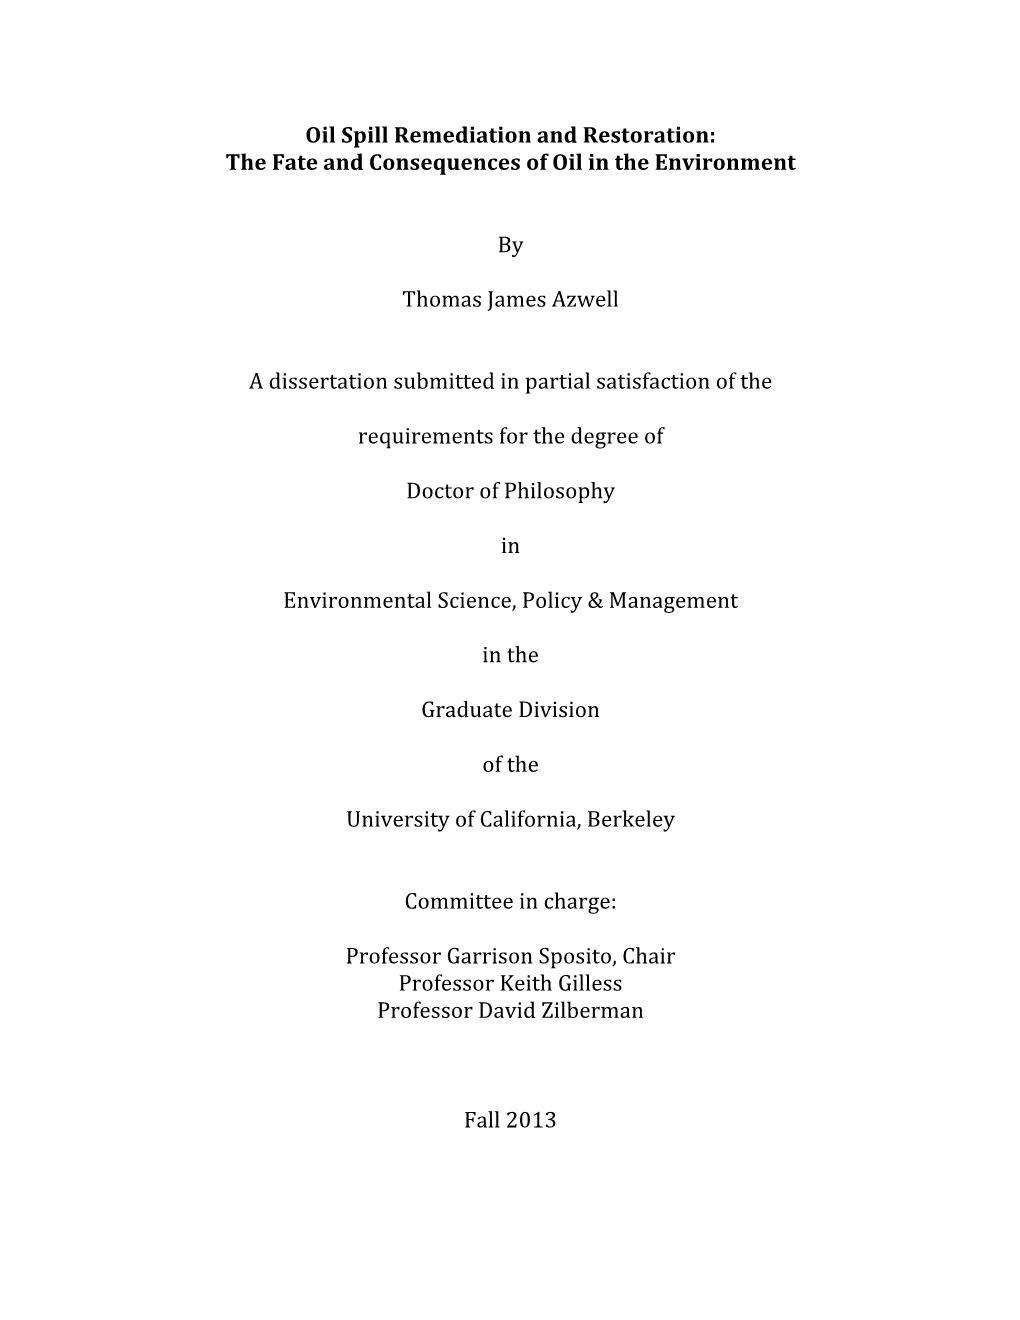 Oil Spill Remediation and Restoration: the Fate and Consequences of Oil in the Environment